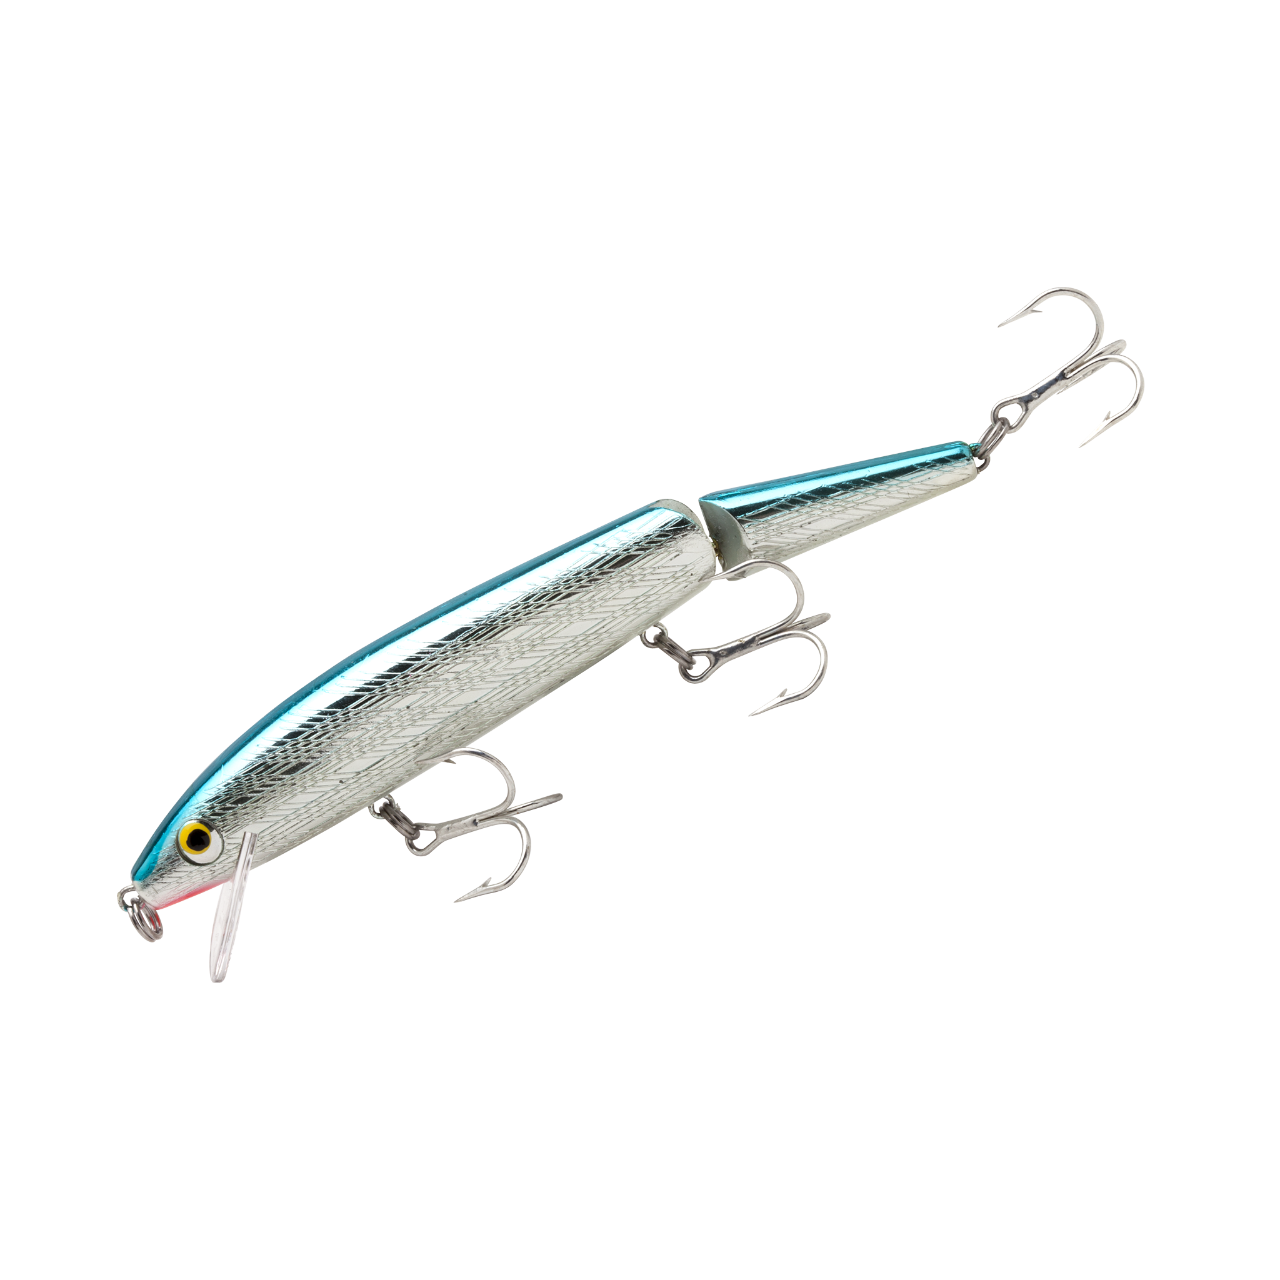 Rebel Jointed Minnow Silver Black 1/8 oz